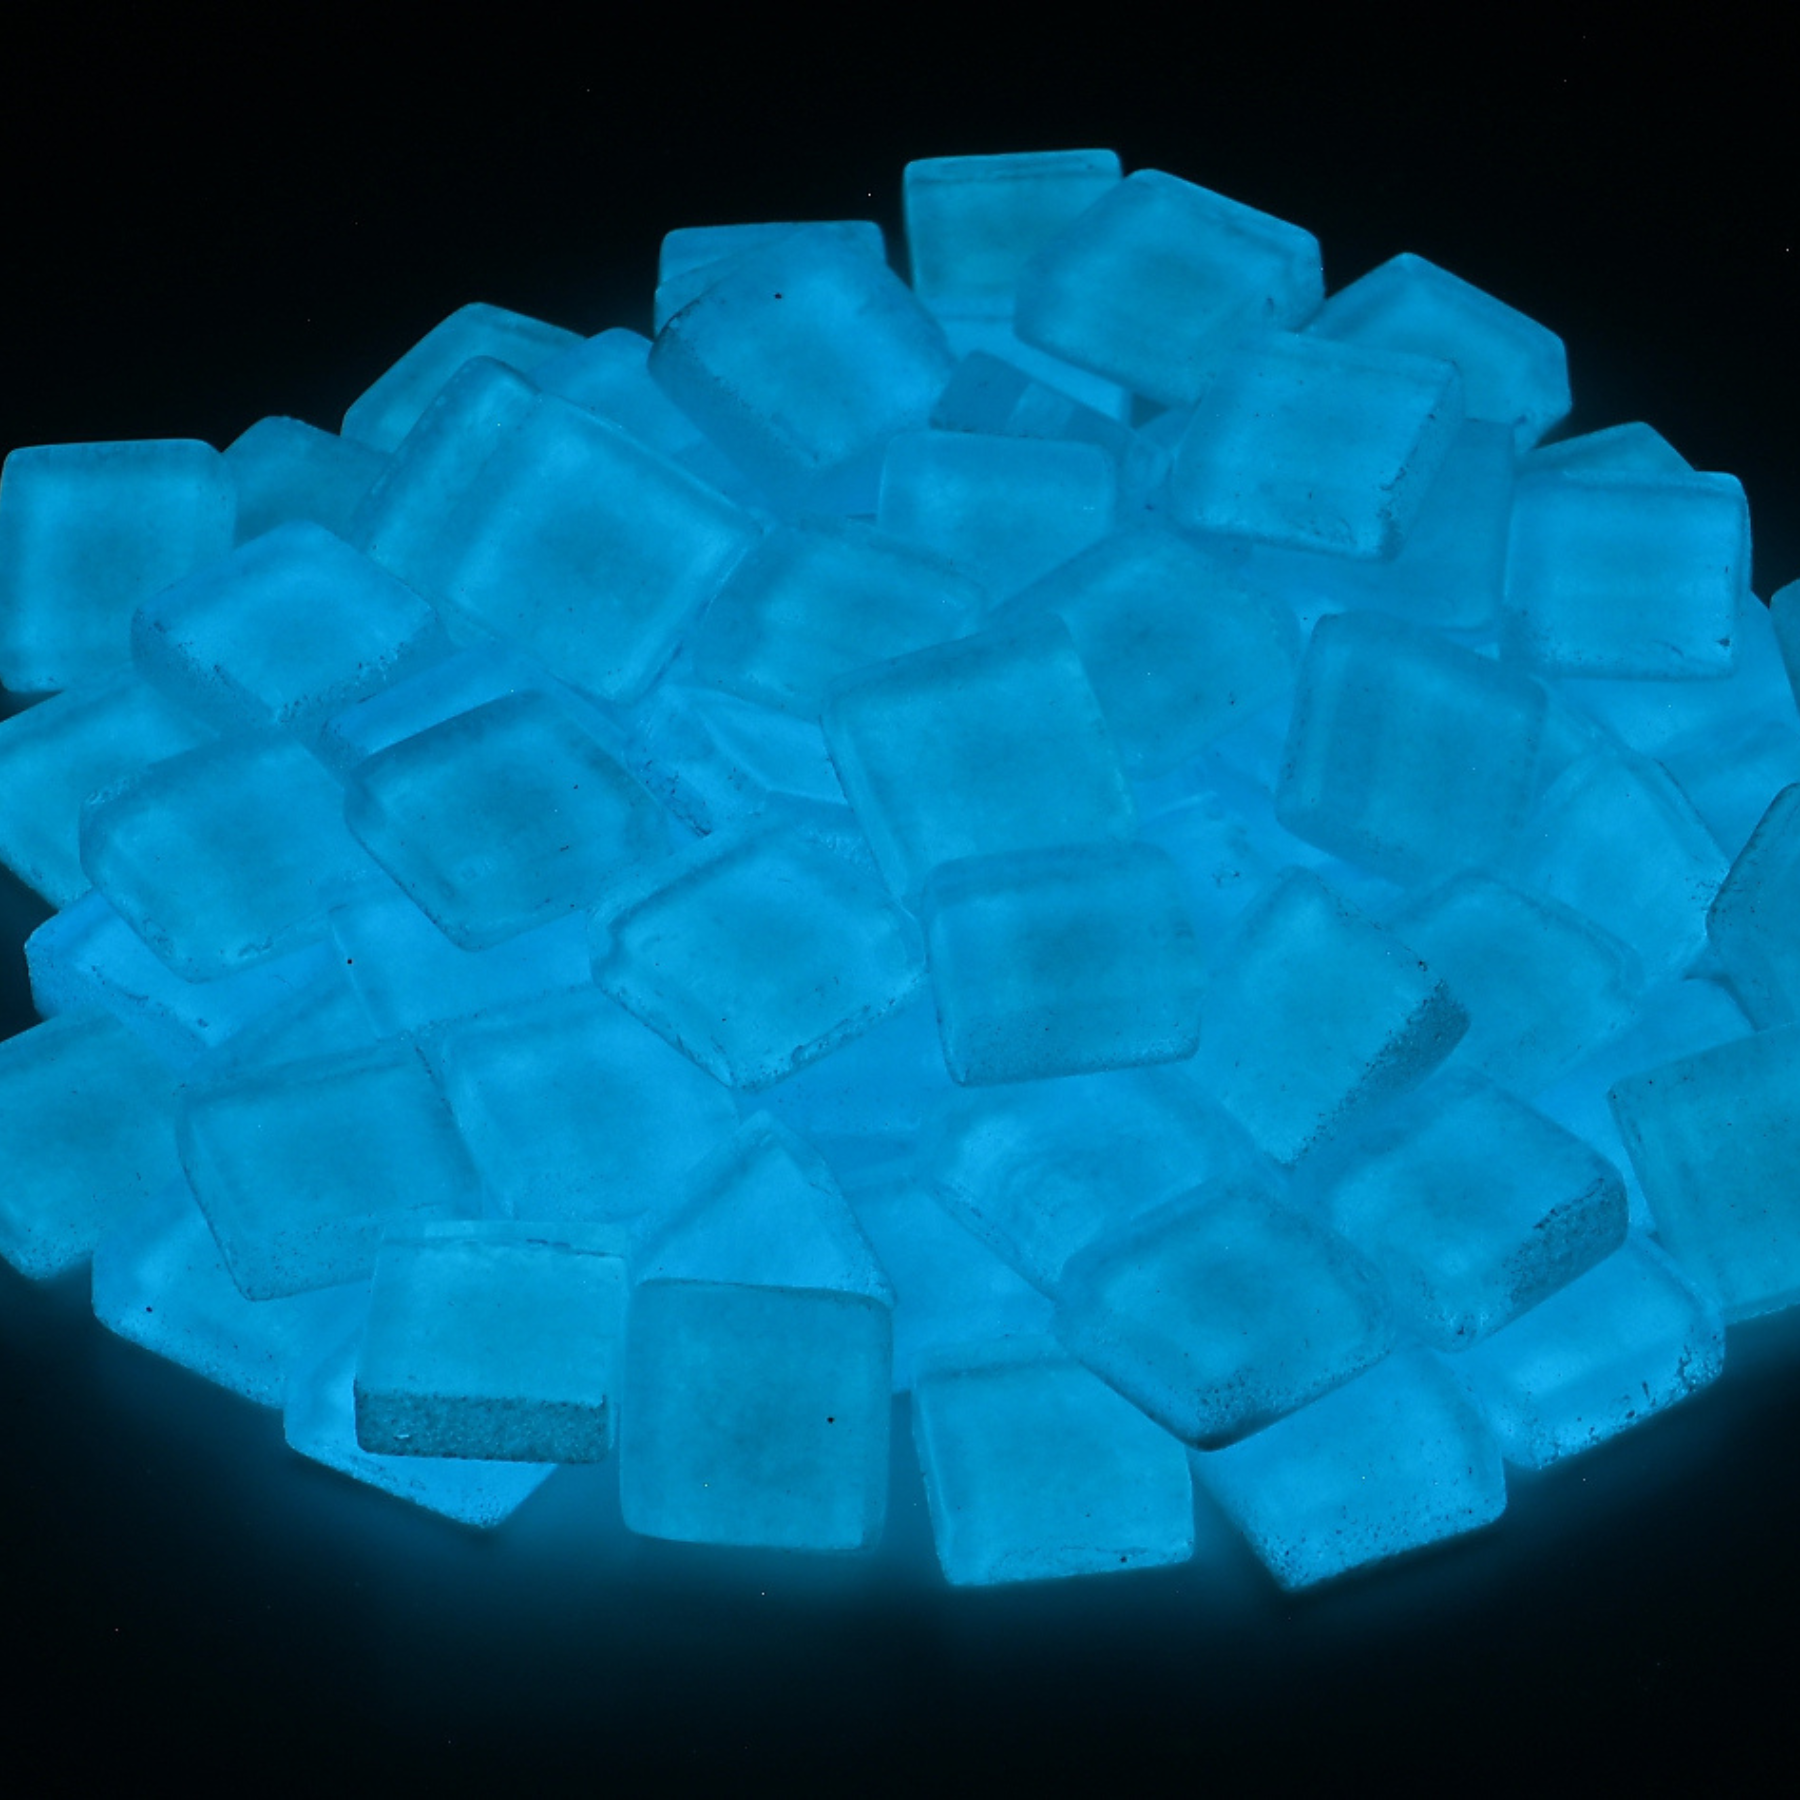 Soft Glass Squares - Blue Glow In The Dark